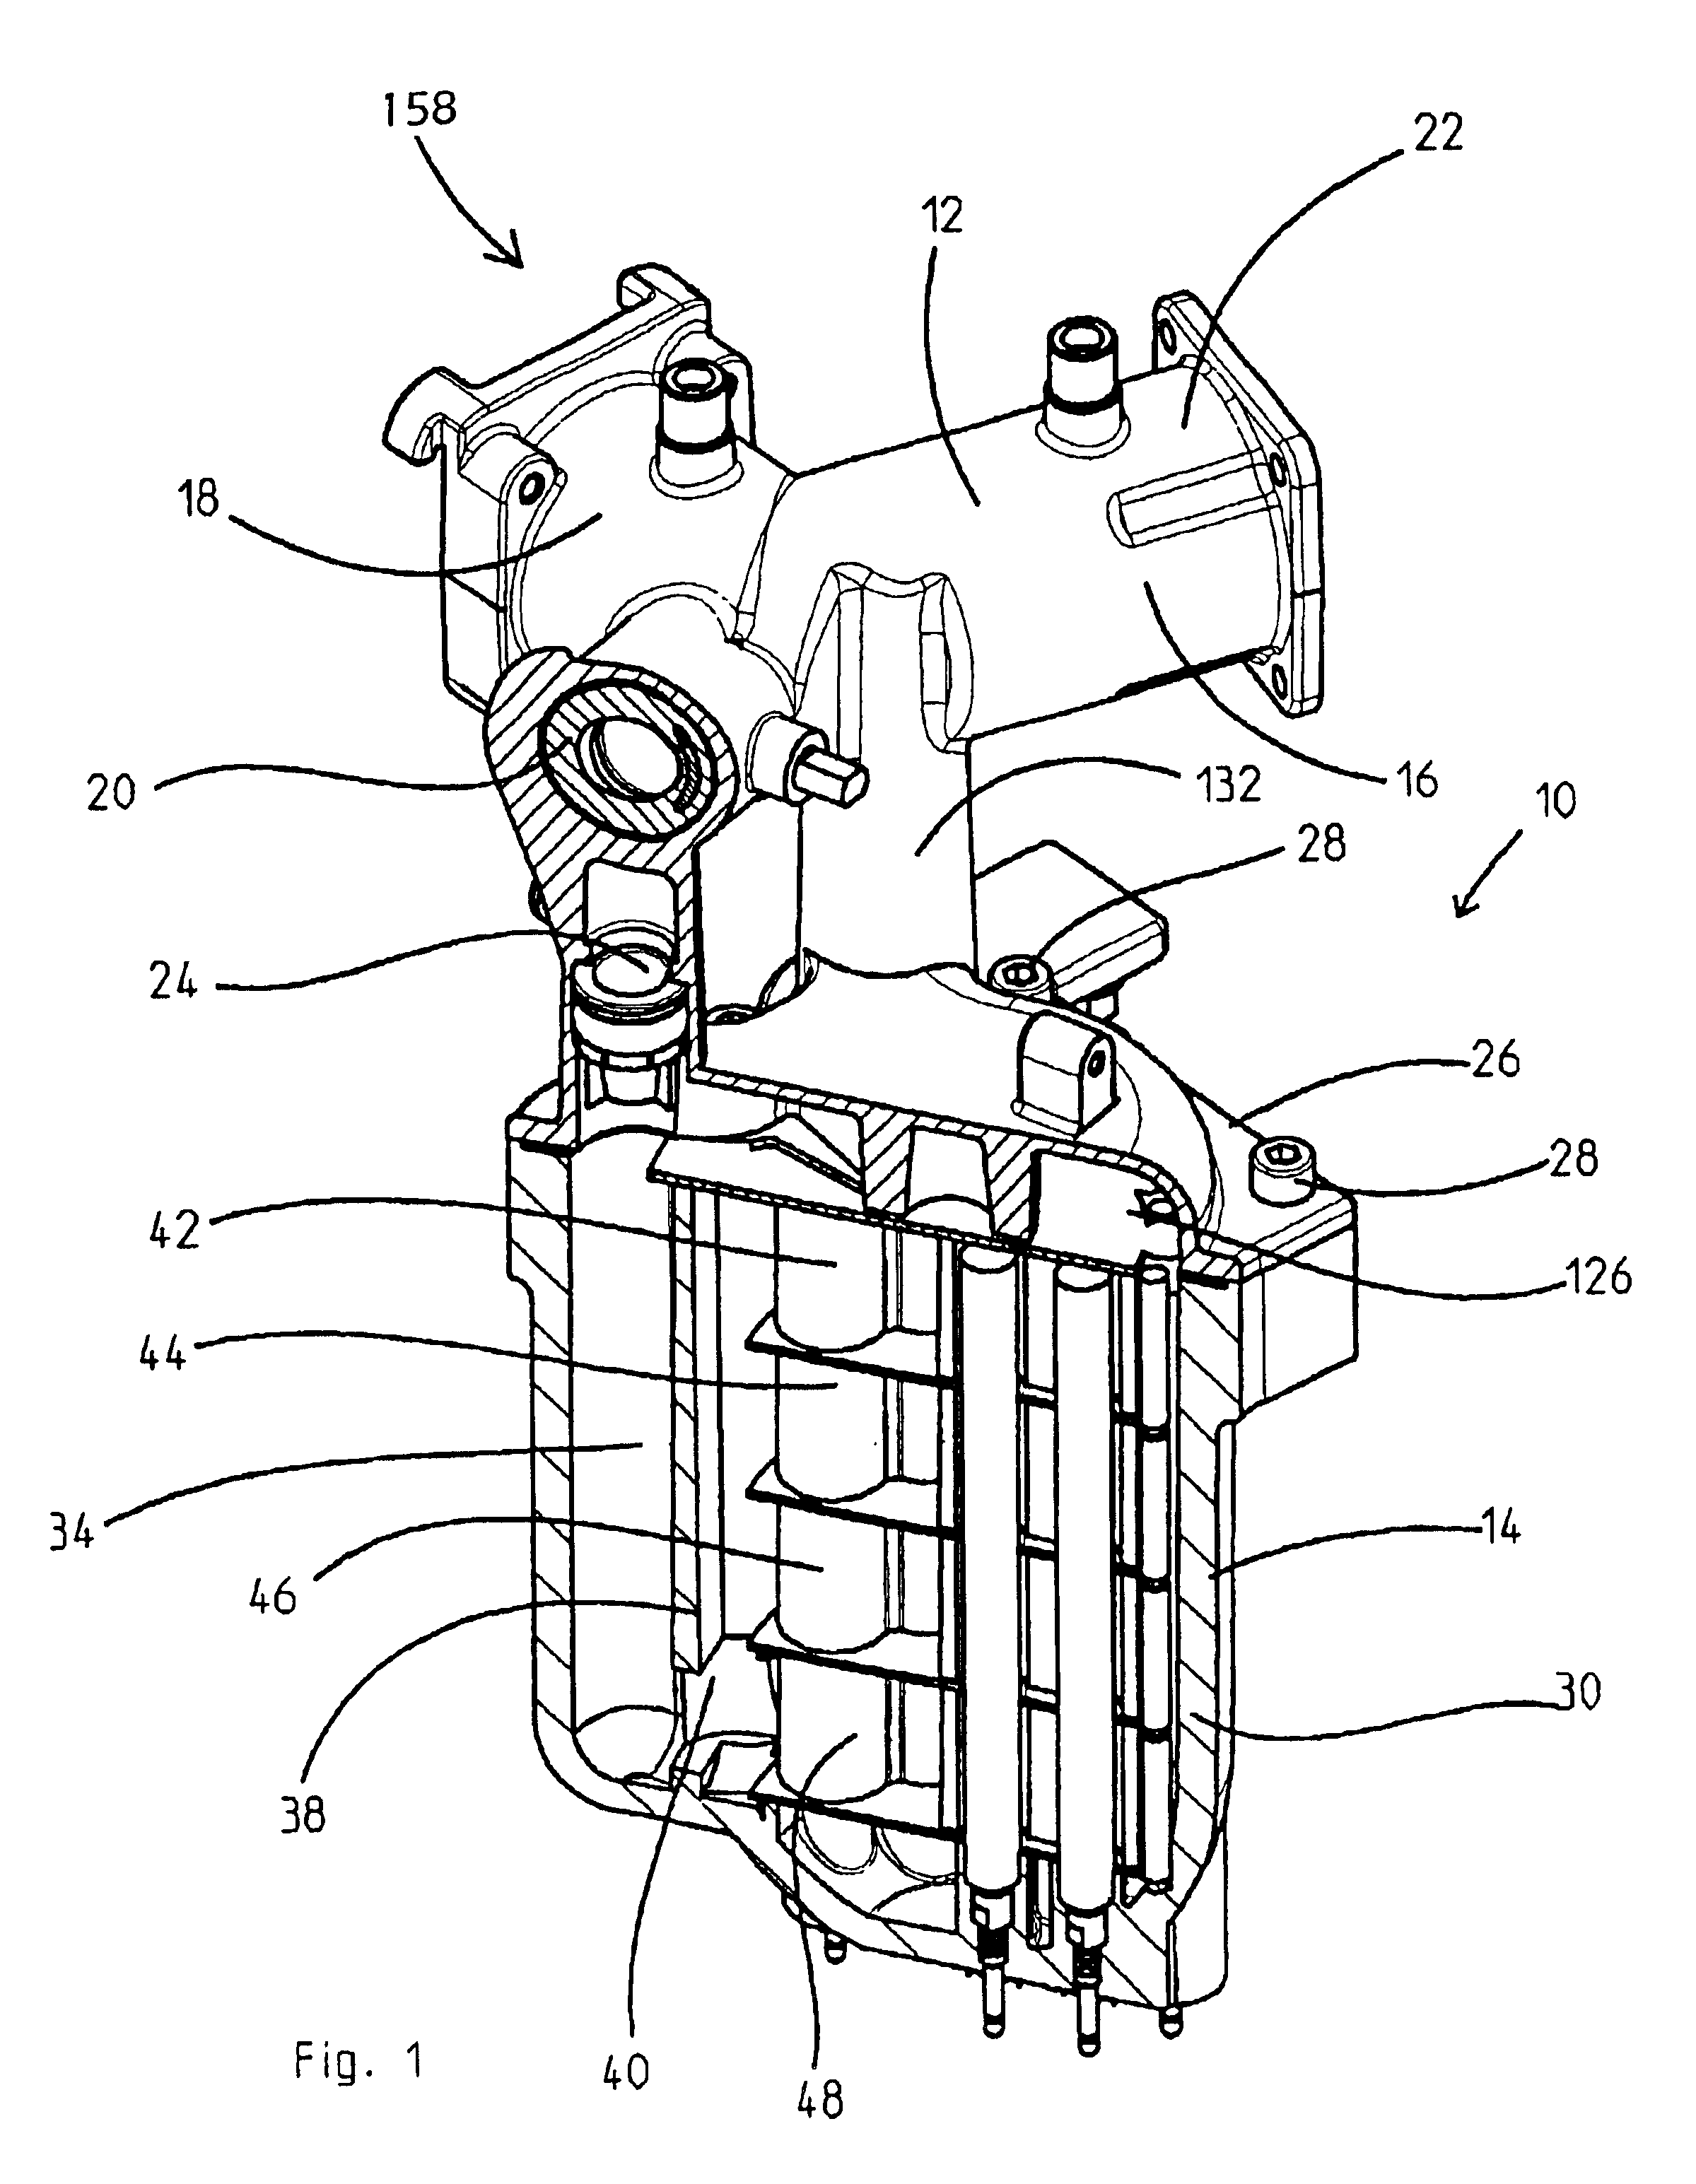 Apparatus for treating water by means of an electric field